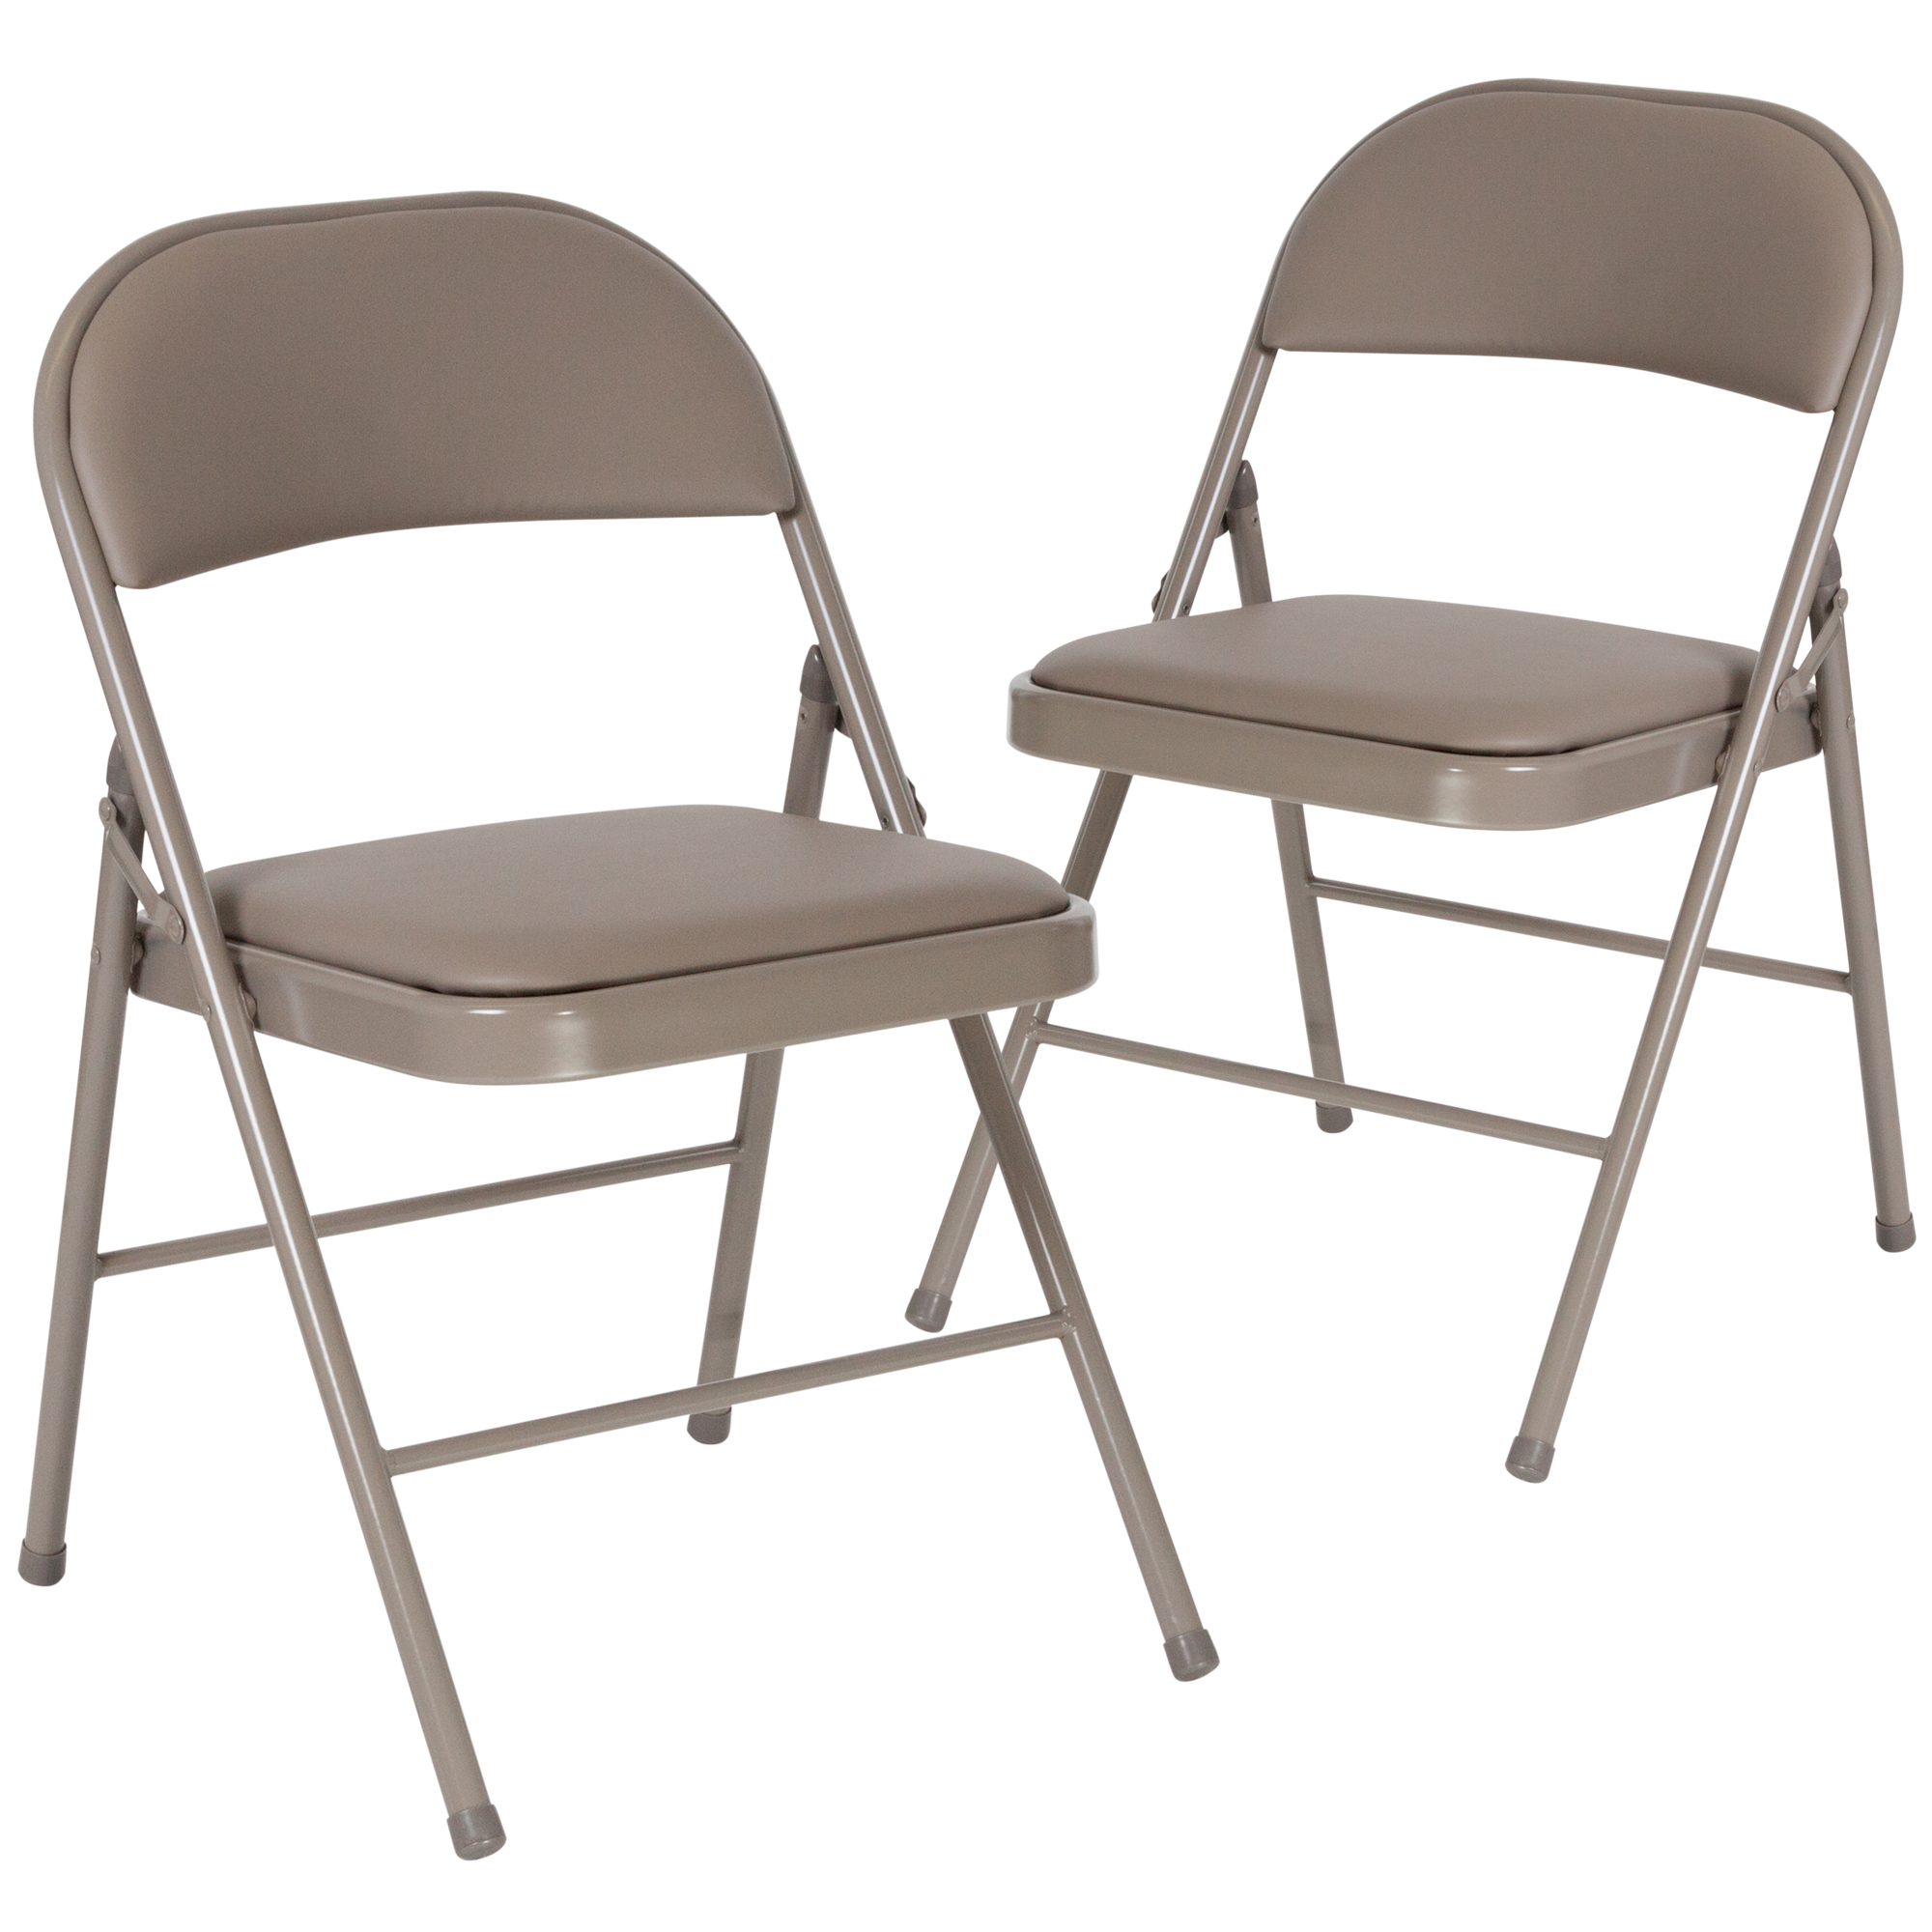 Flash Furniture, 2 Pack Double Braced Gray Vinyl Folding Chair, Primary Color Gray, Included (qty.) 2, Model 2HAF003DGY